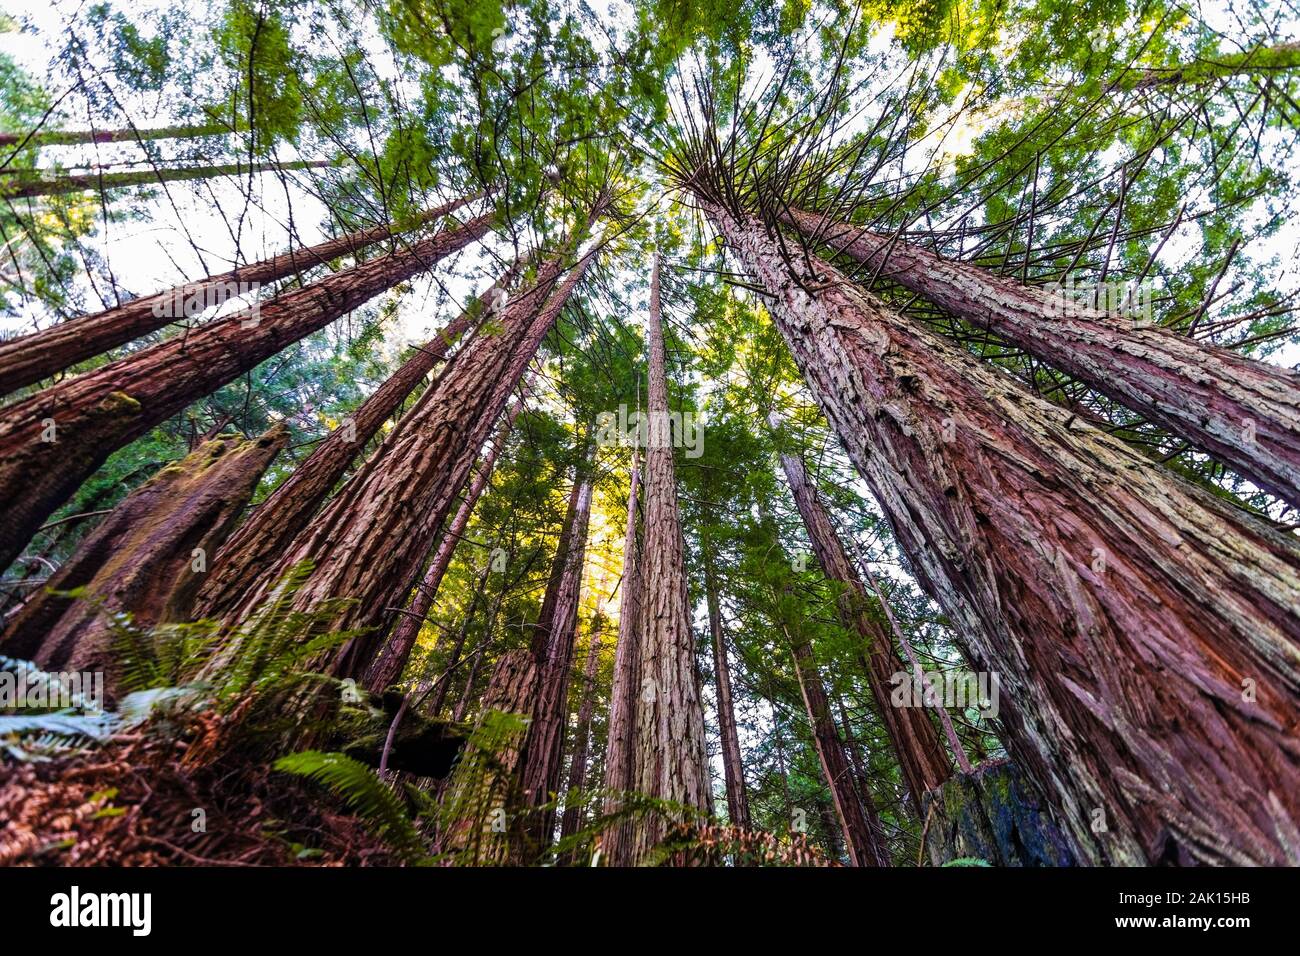 Looking up in a Coastal Redwood forest (Sequoia Sempervirens), converging tree trunks surrounded by evergreen foliage, Purisima Creek Redwoods Preserv Stock Photo